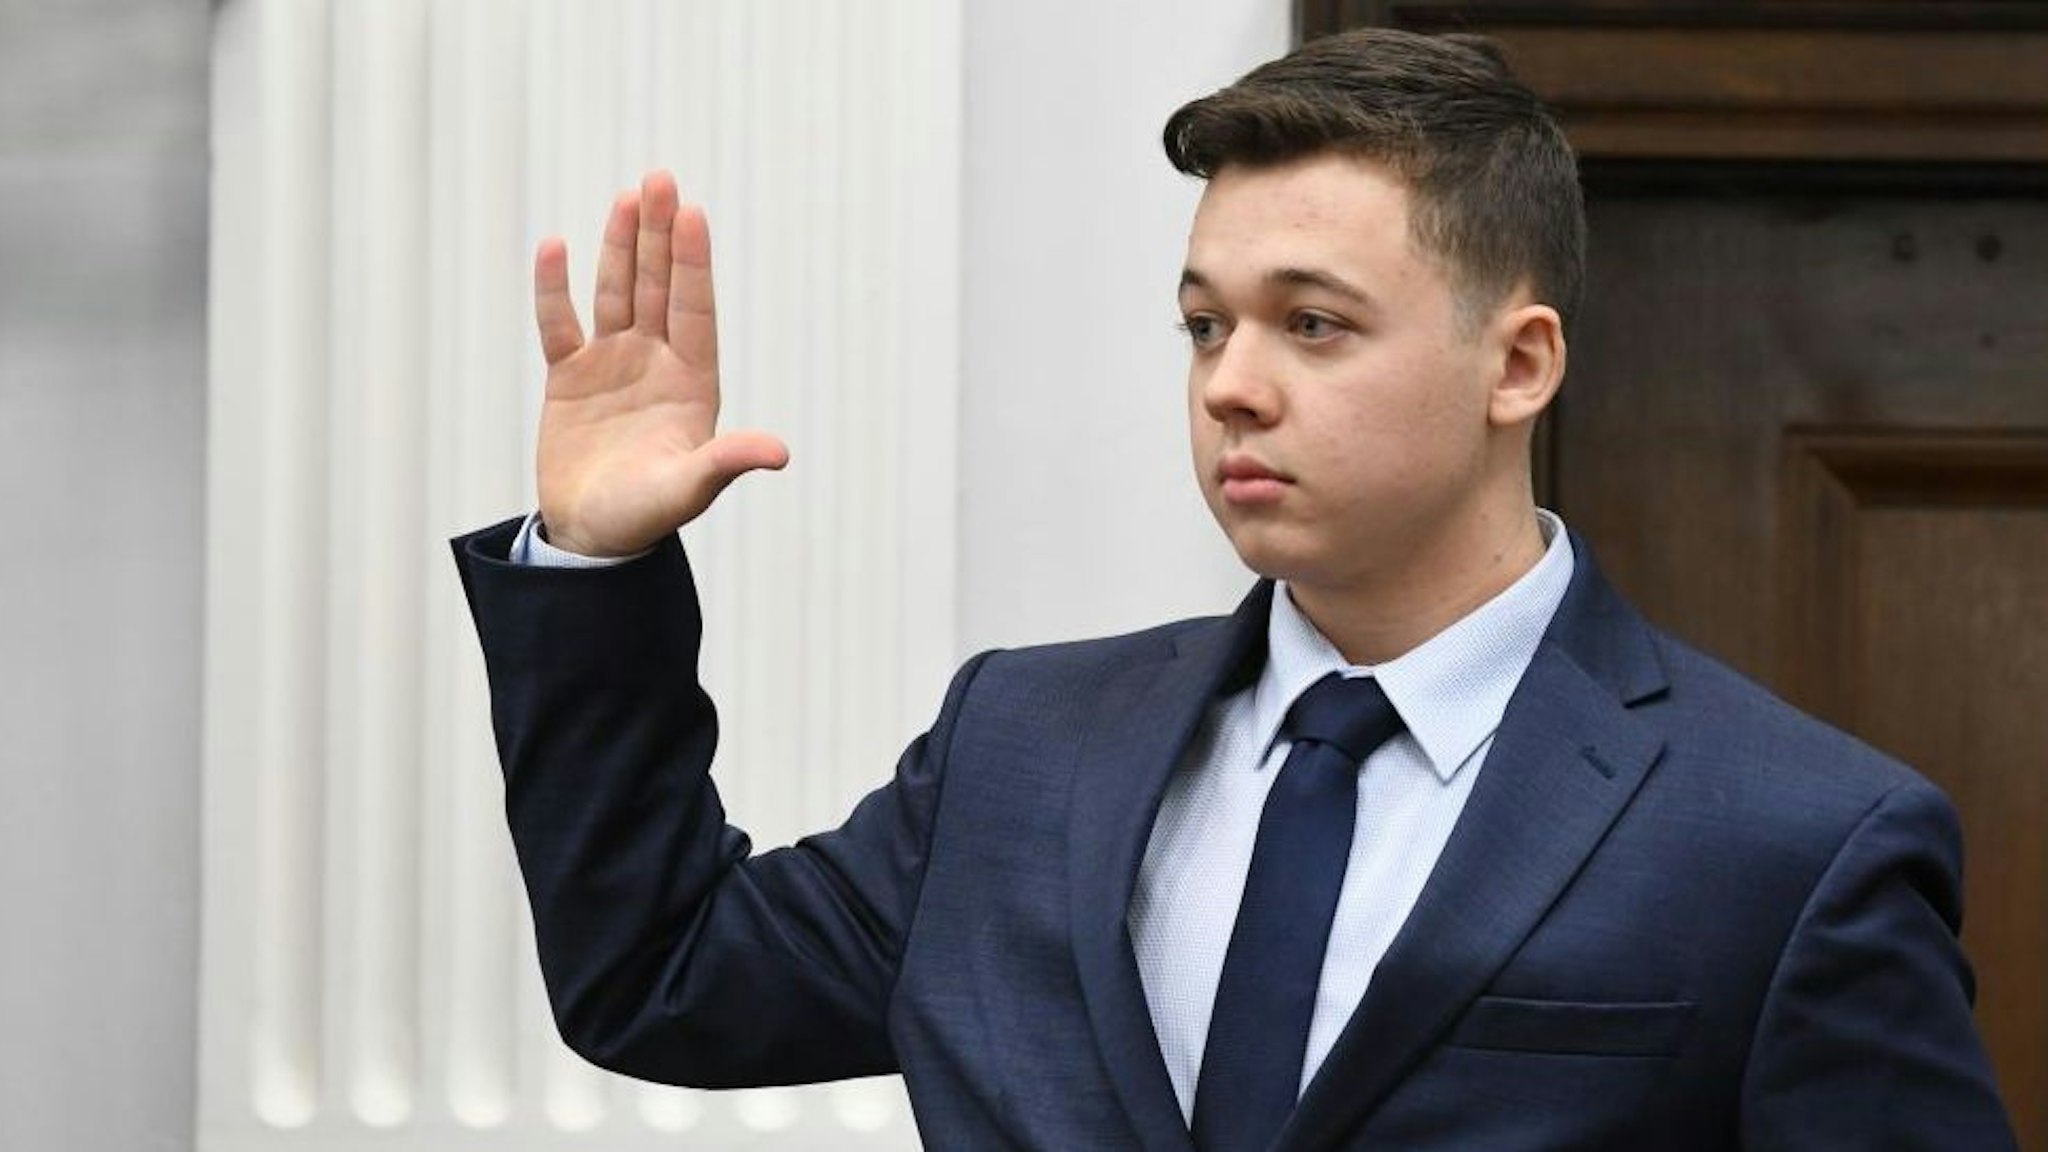 Kyle Rittenhouse is sworn in to testify during his trial at the Kenosha County Courthouse on November 10, 2021 in Kenosha, Wisconsin.